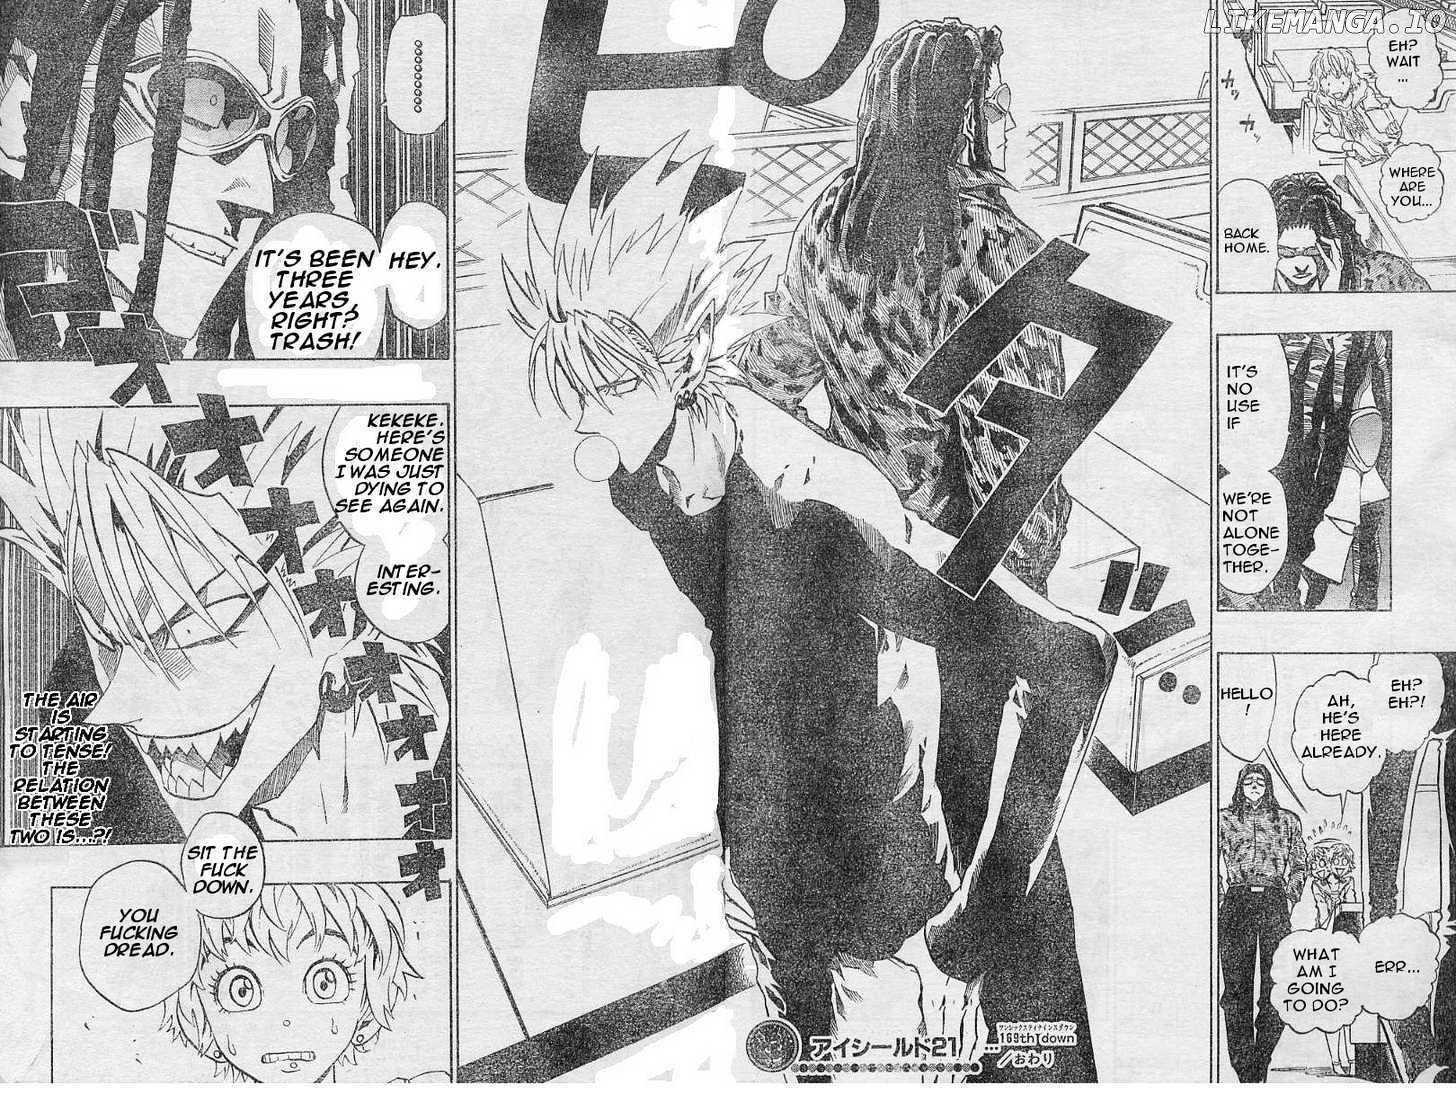 Eyeshield 21 chapter 168-169 - page 34